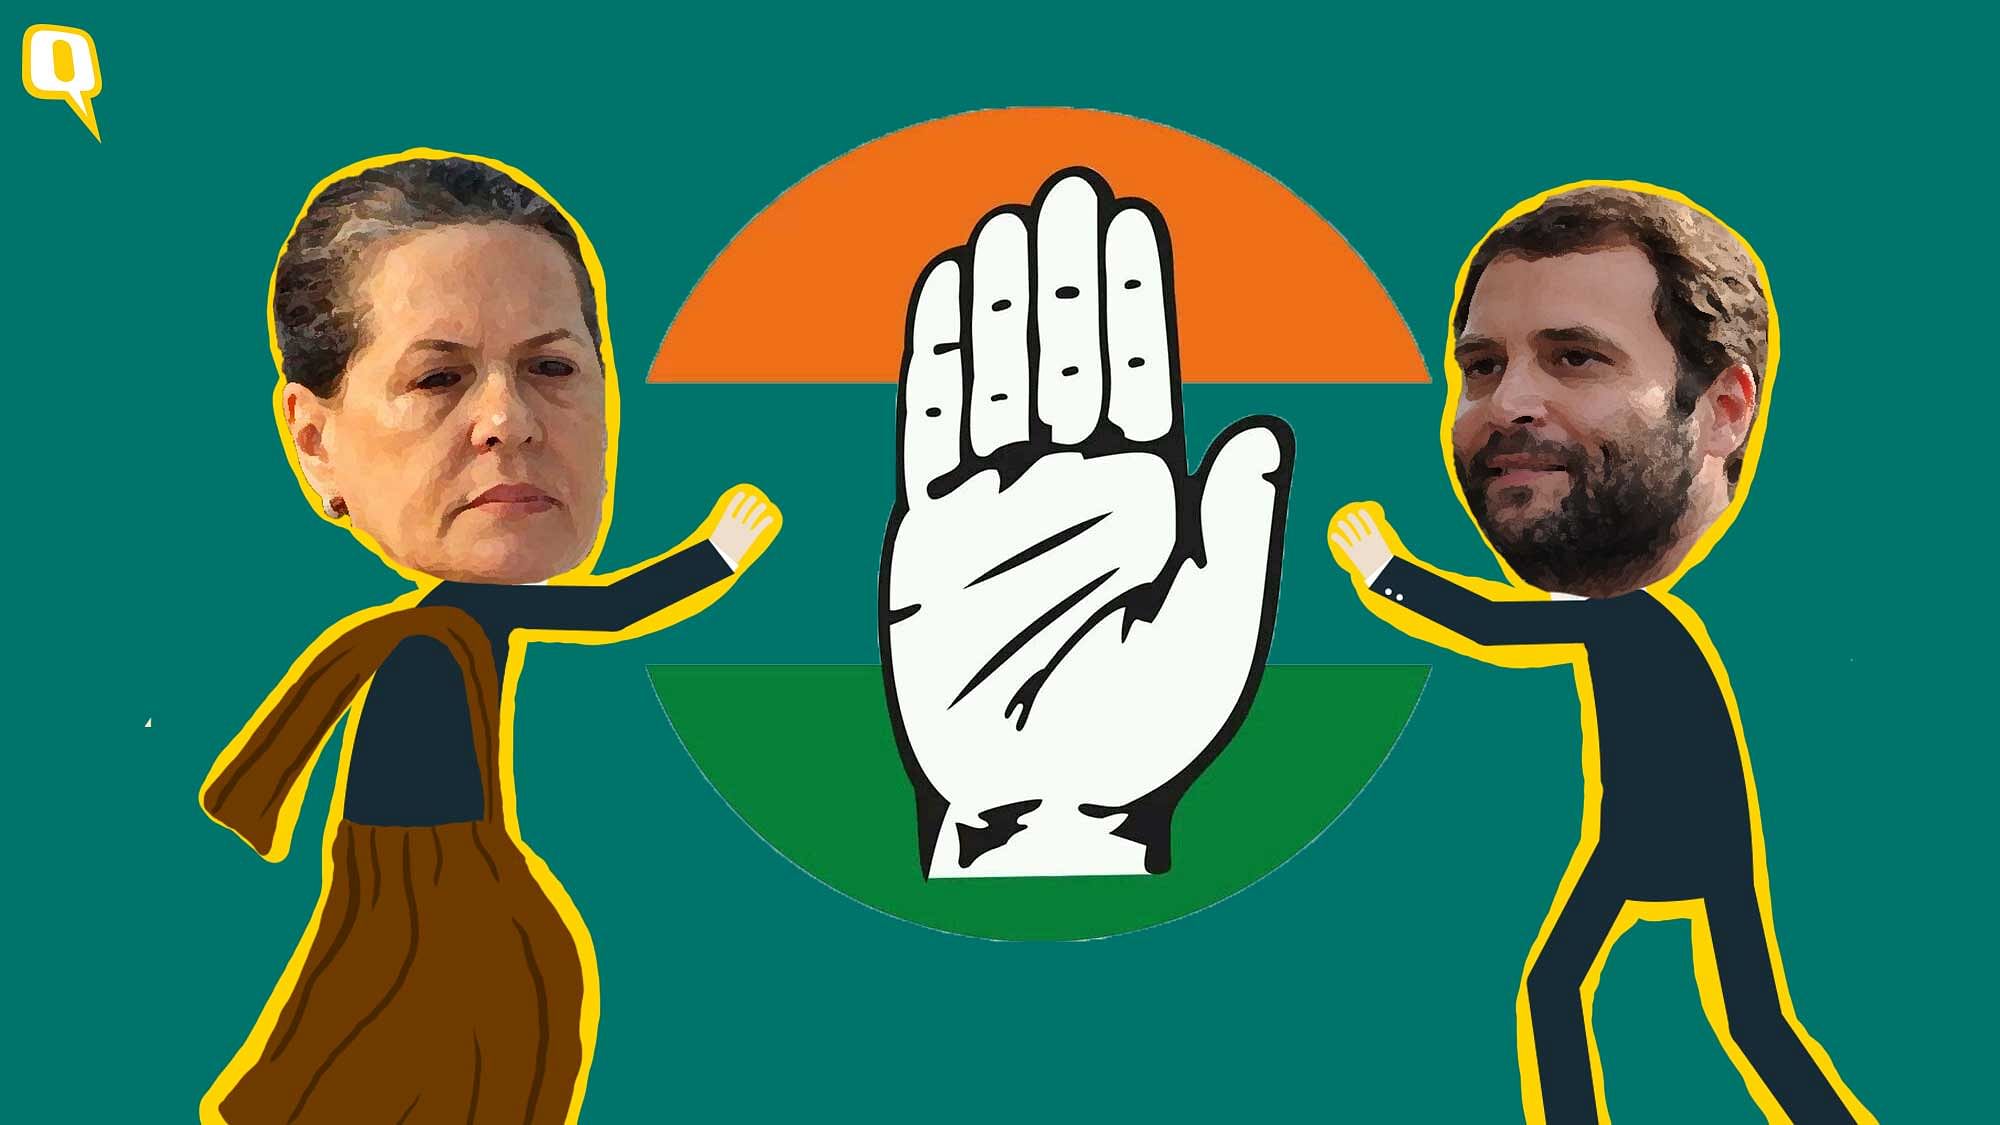 As Rahul gears up to take charge of the Congress, the Gandhi scion’s newly found aggression will act in his favour.